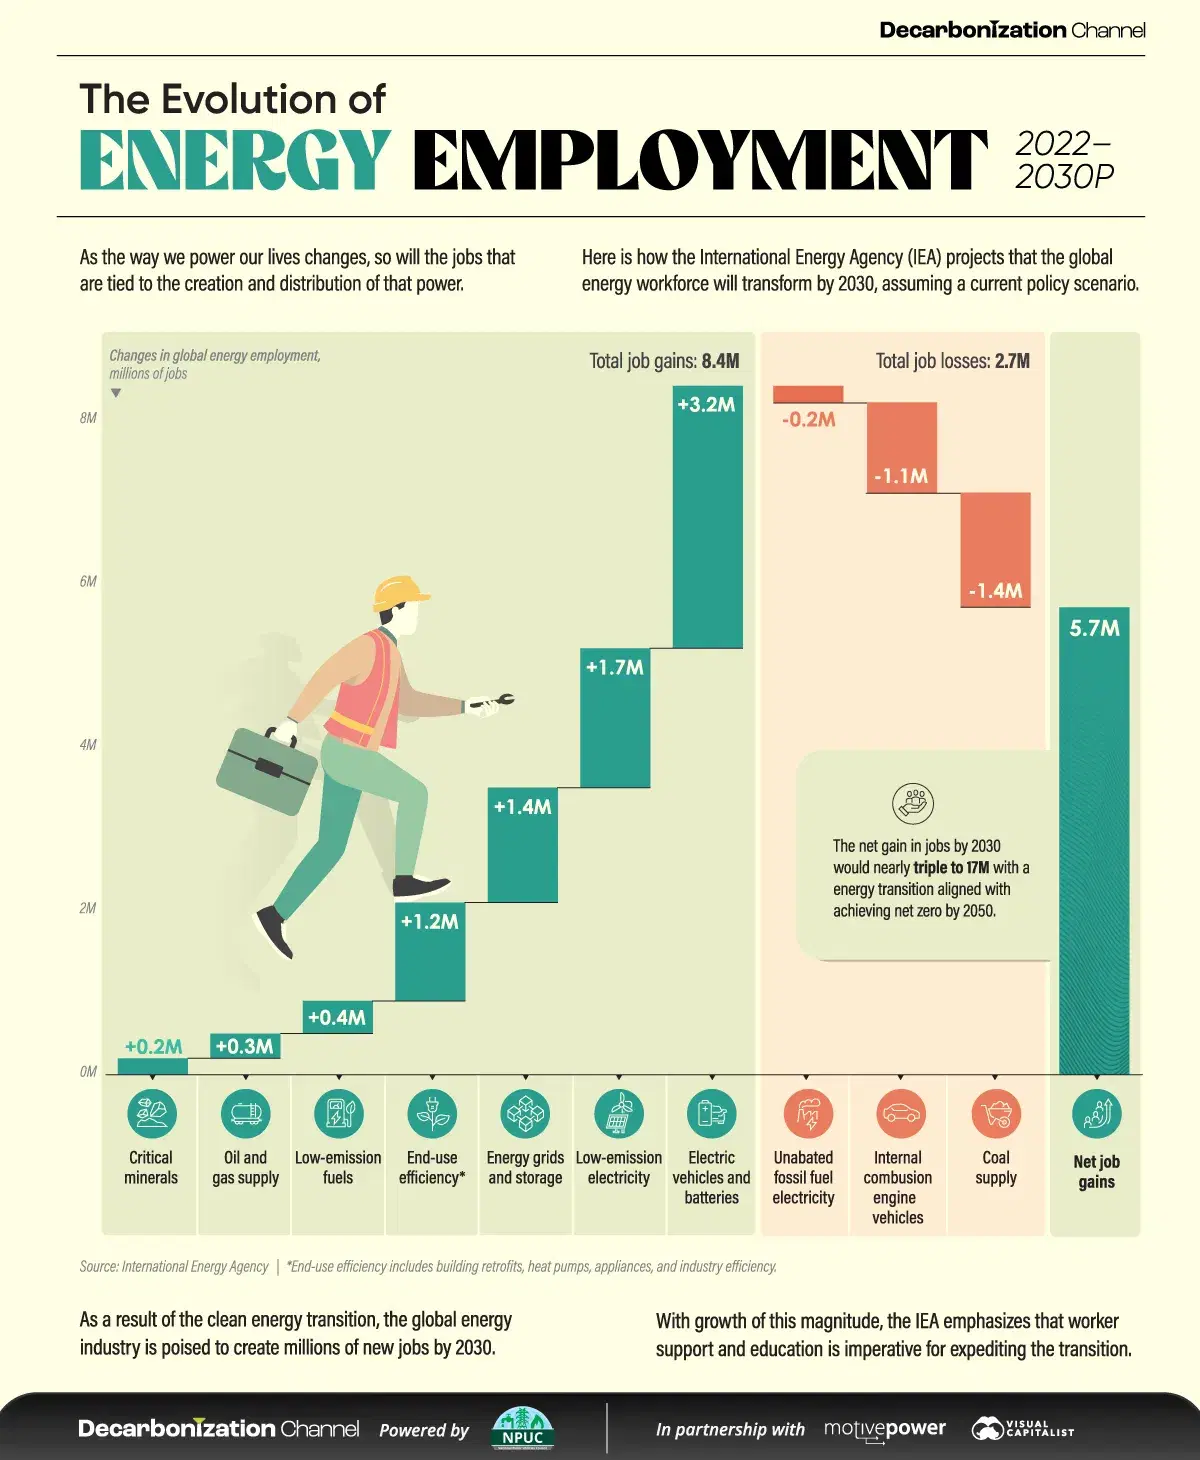 The Evolution of Energy Employment (2022–2030P)